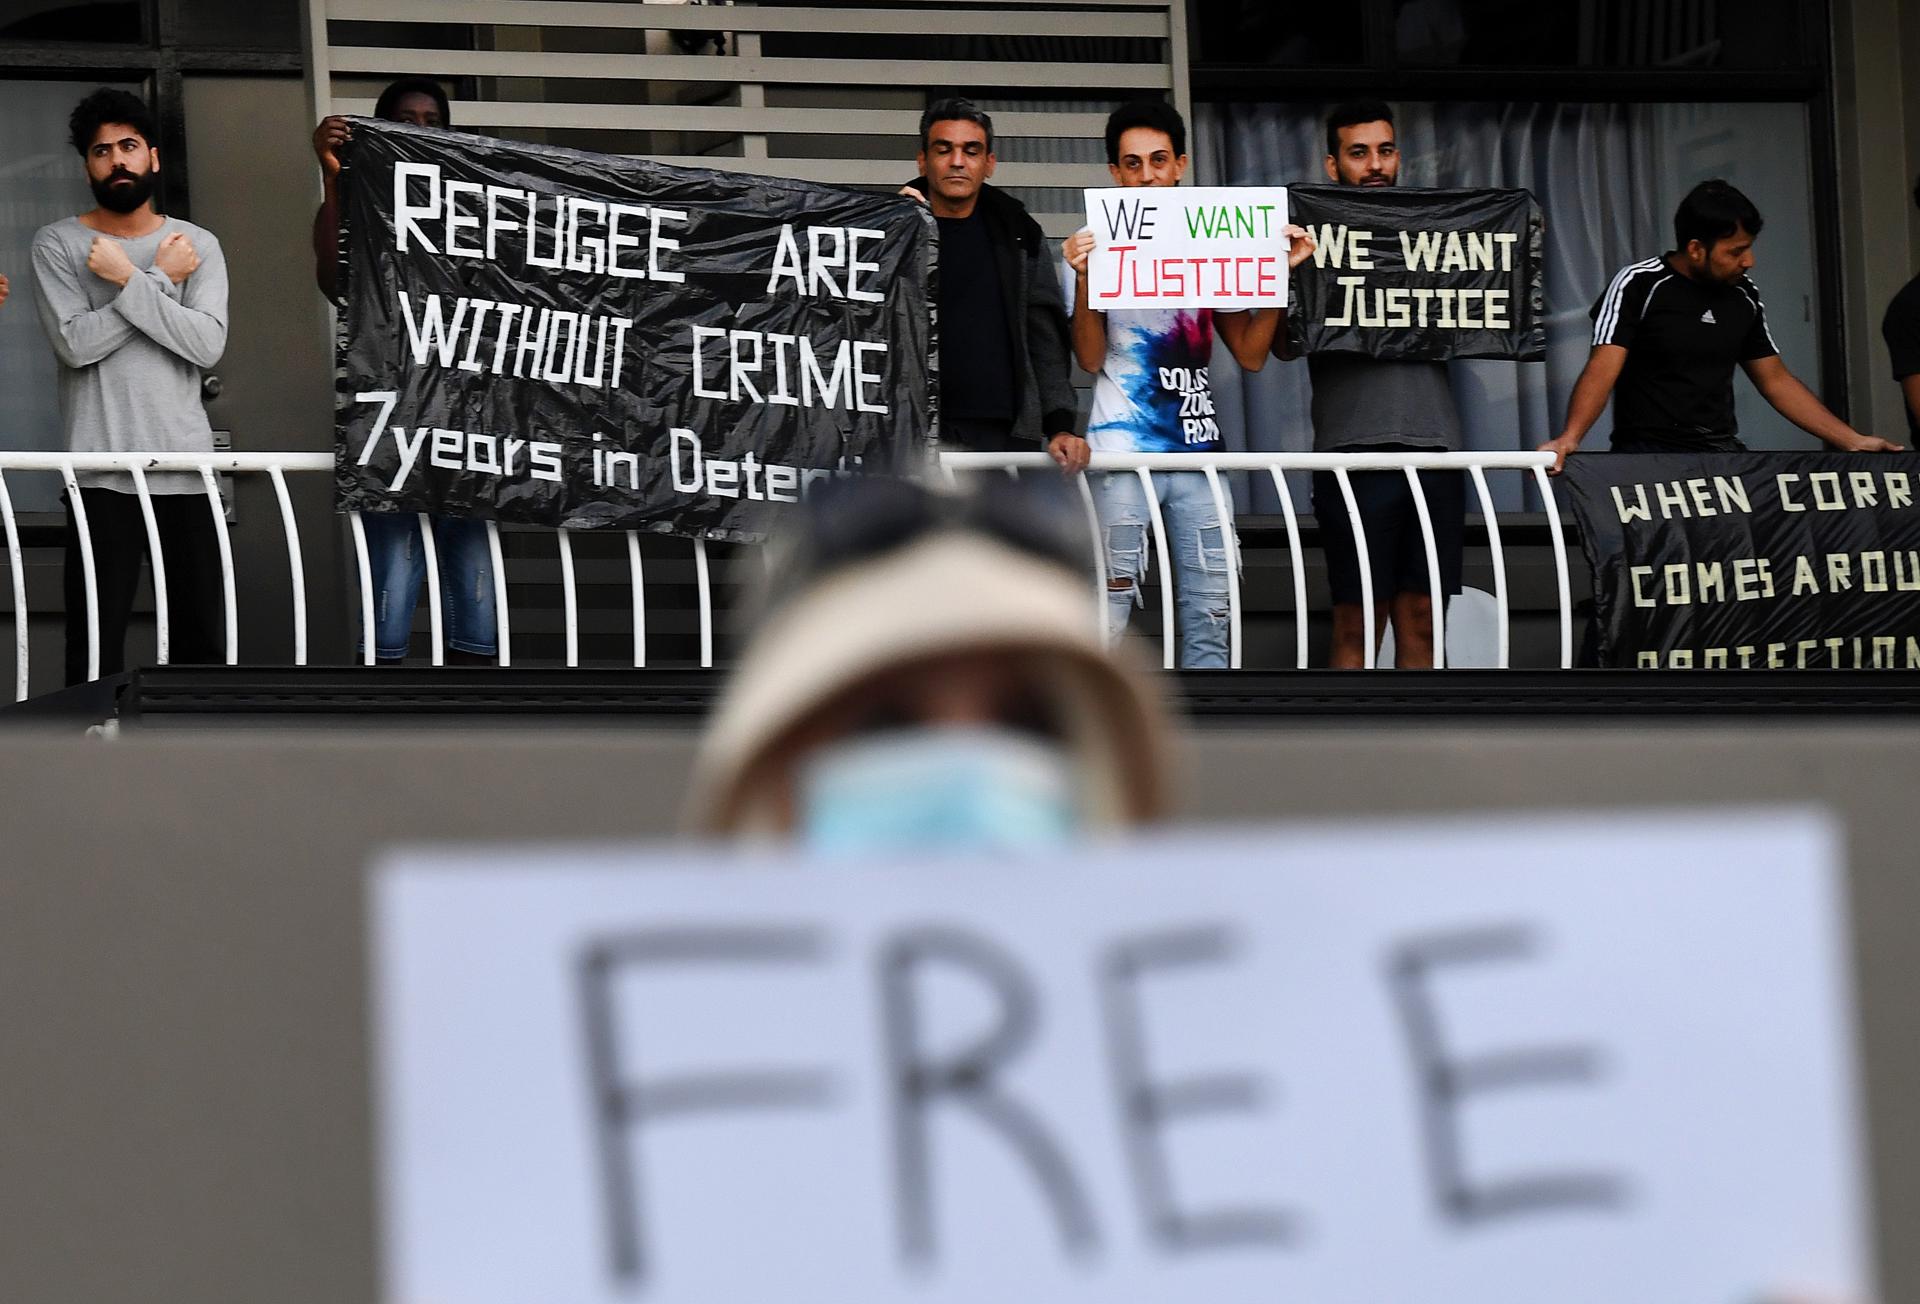 A refugee supporter holds up a sign as asylum seekers, who are being held in detention, protest at an inner city motel in Brisbane, Australia, 08 May 2020. EFE-EPA FILE/DAN PELED AUSTRALIA AND NEW ZEALAND OUT
